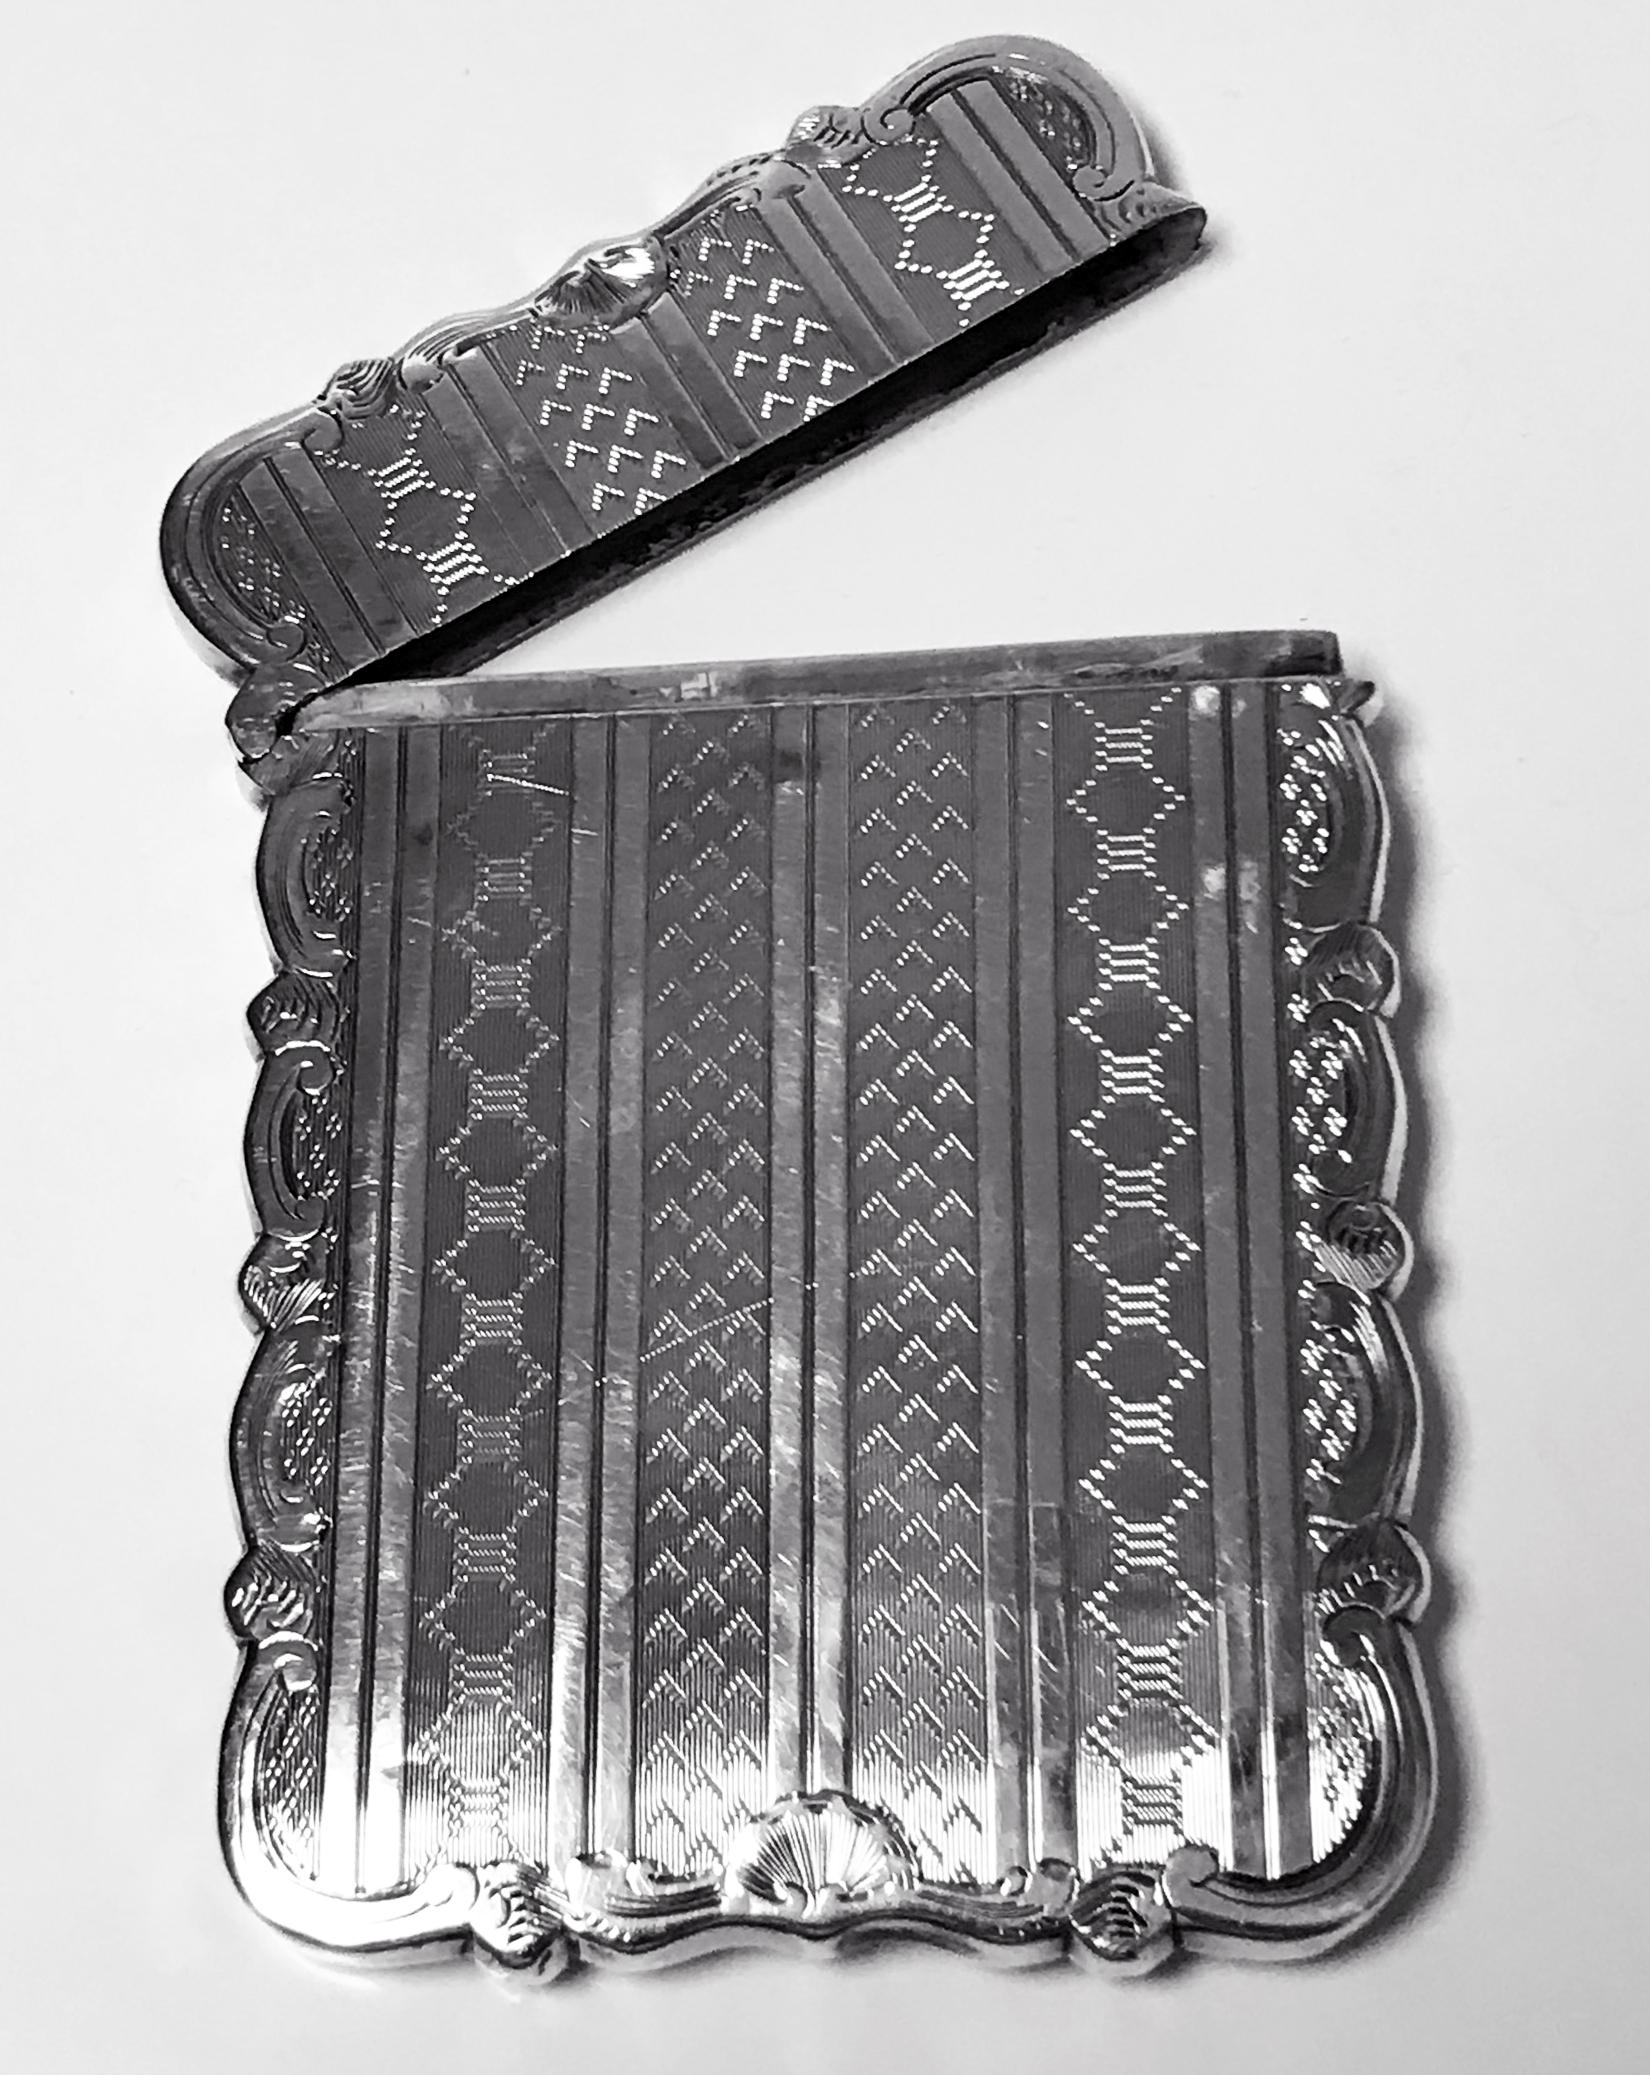 Antique Sterling Silver Card Case, Birmingham 1866 Hilliard and Thomason. The card case rectangular form engraved panels design centering engraved cartouche with scroll foliage edging, hinged cover. Measures: 9.50 x 7.00 cm. Total item weight: 54.89